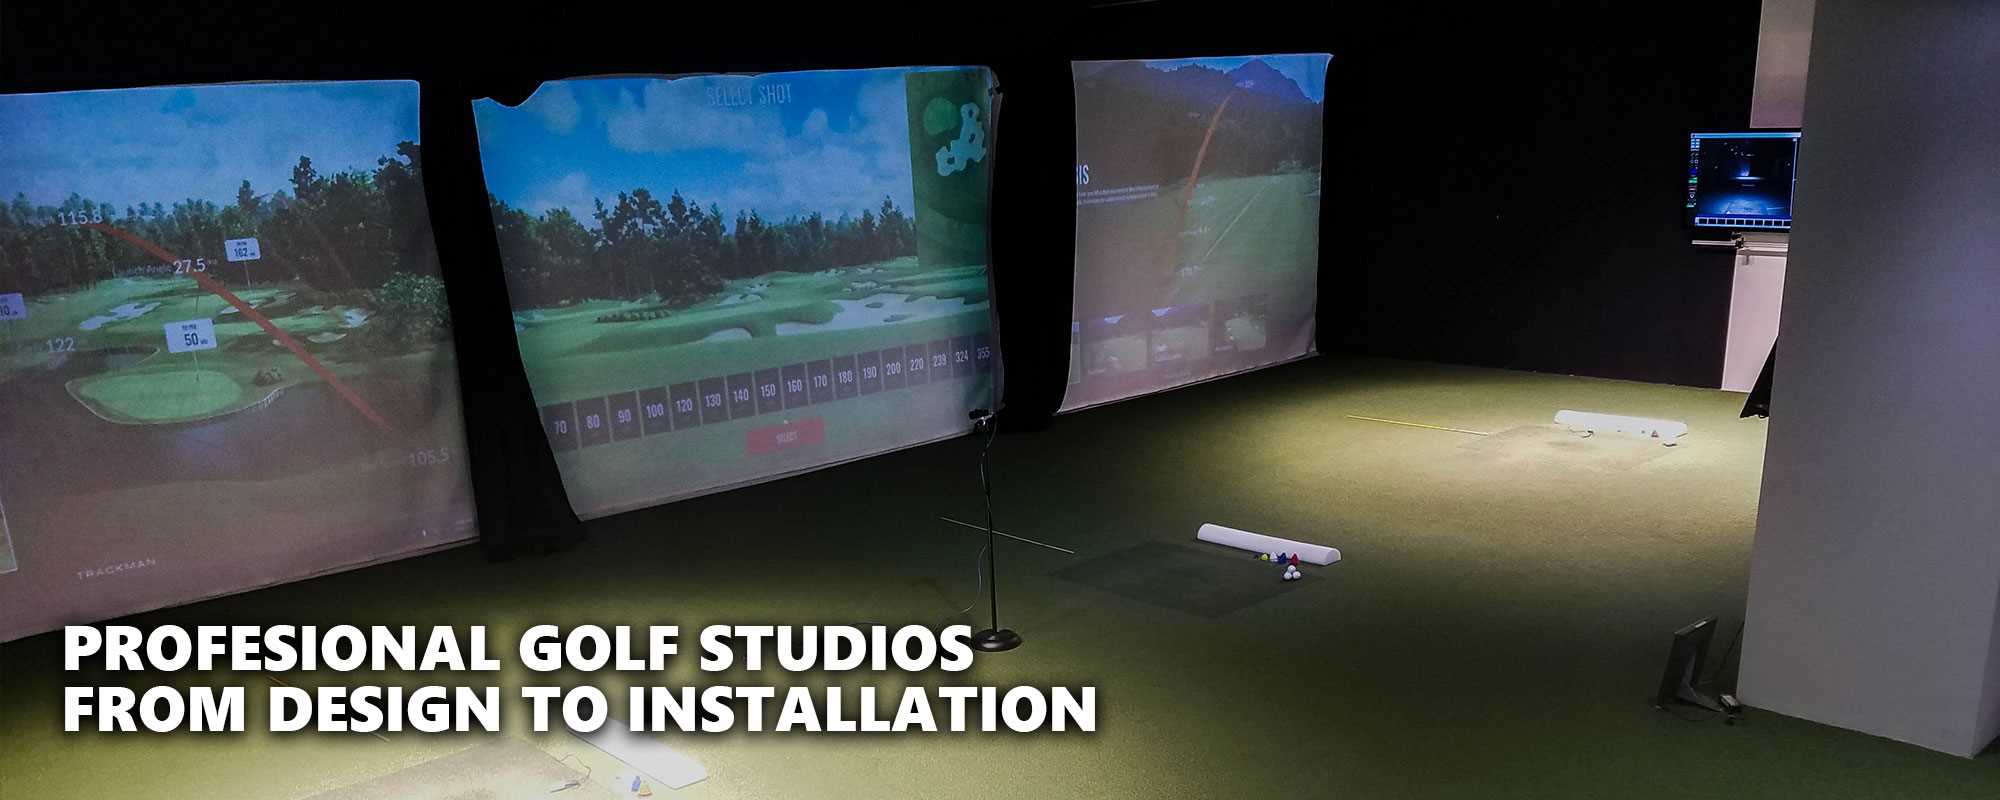 Professional golf studios from design to installation